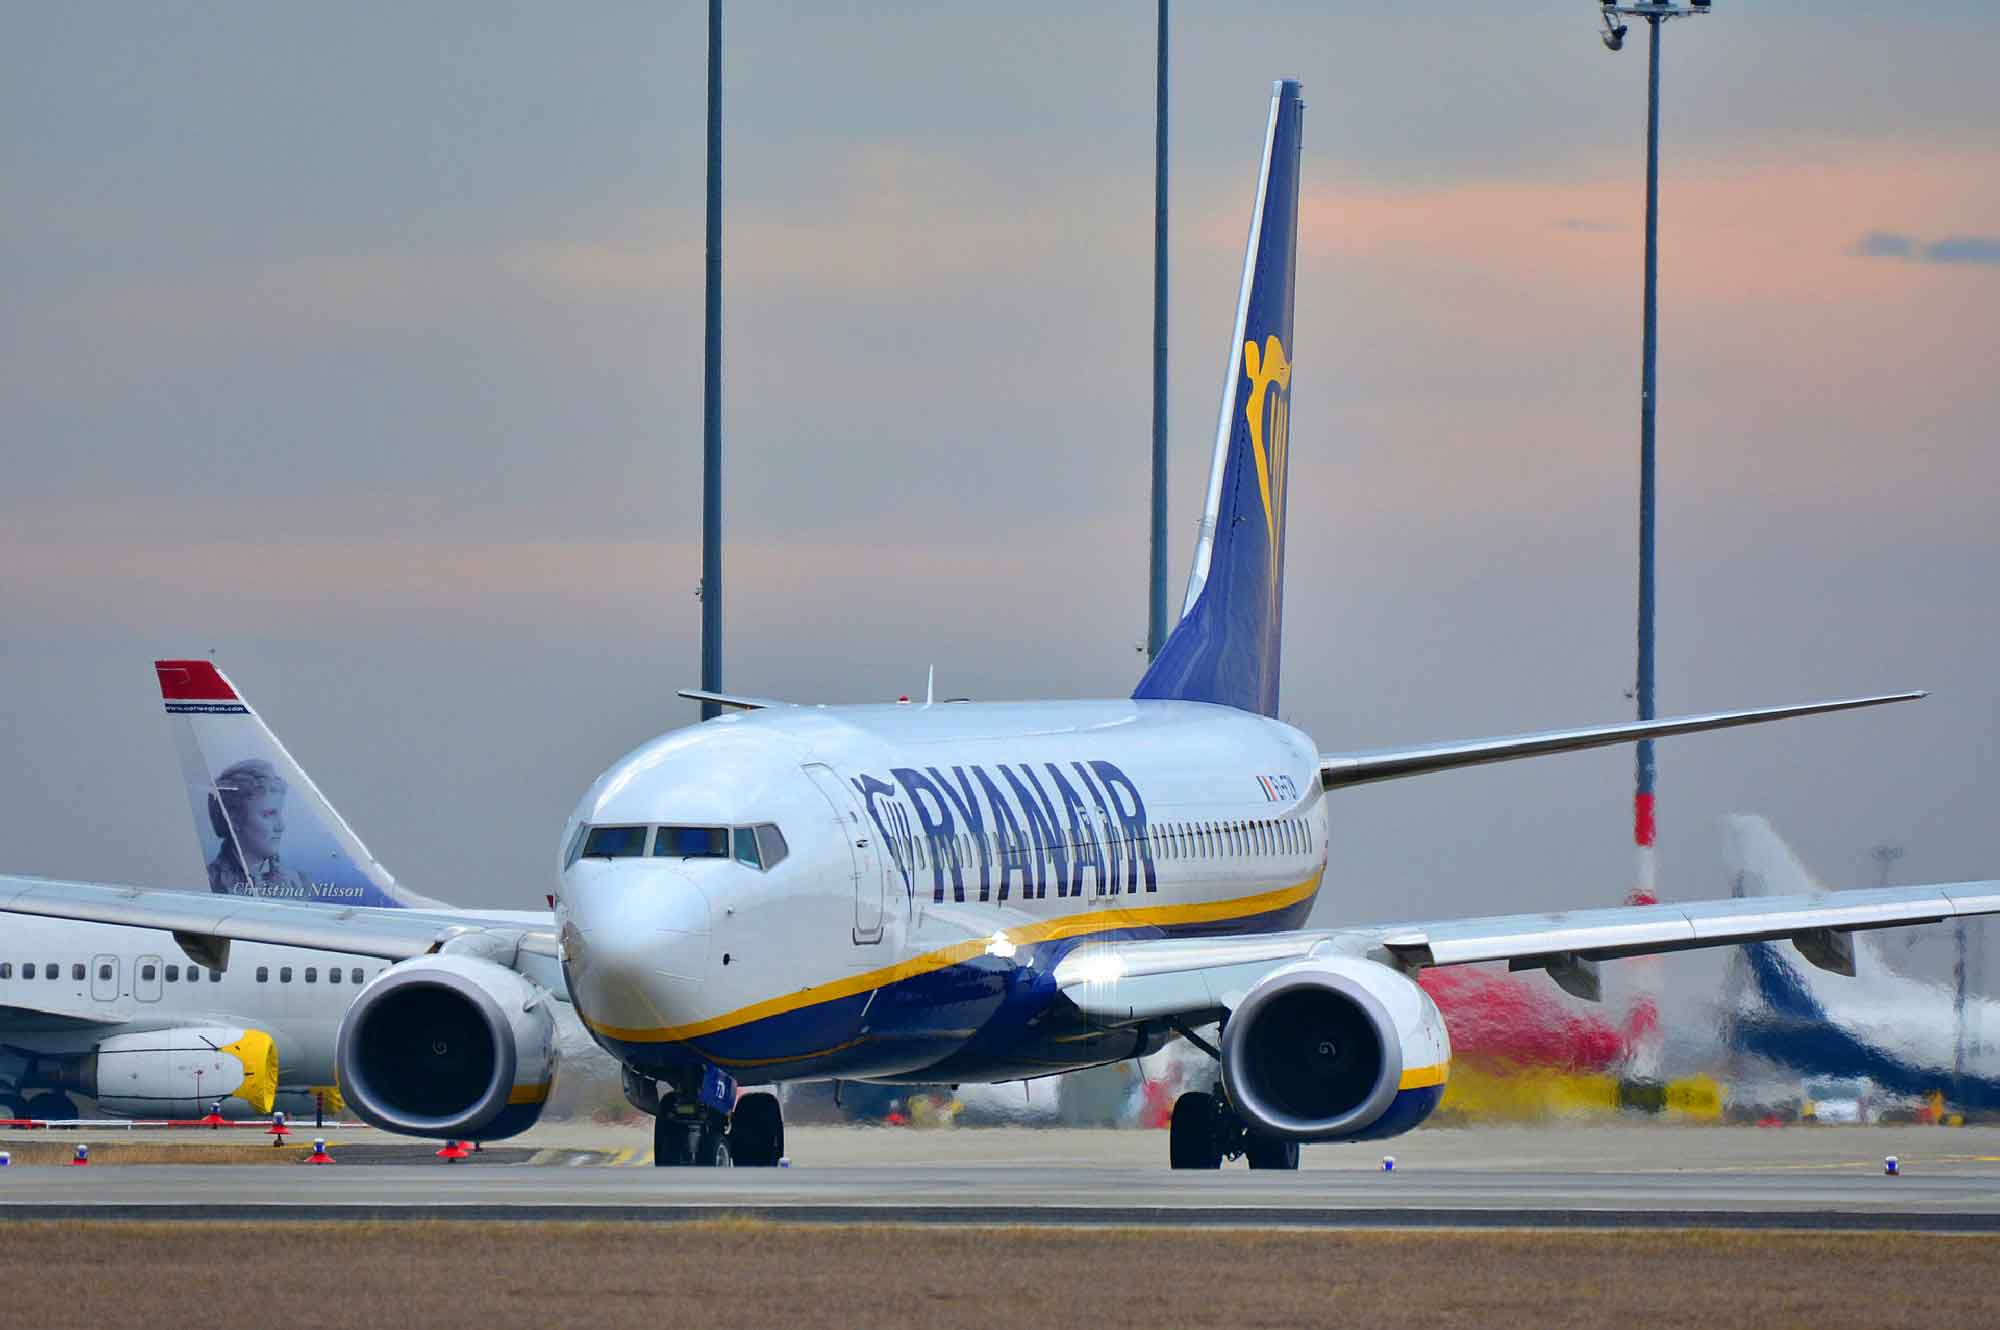 Ryanair Toilet Fee: Budget Airline Plans To Add Pay Toilets To Their Planes